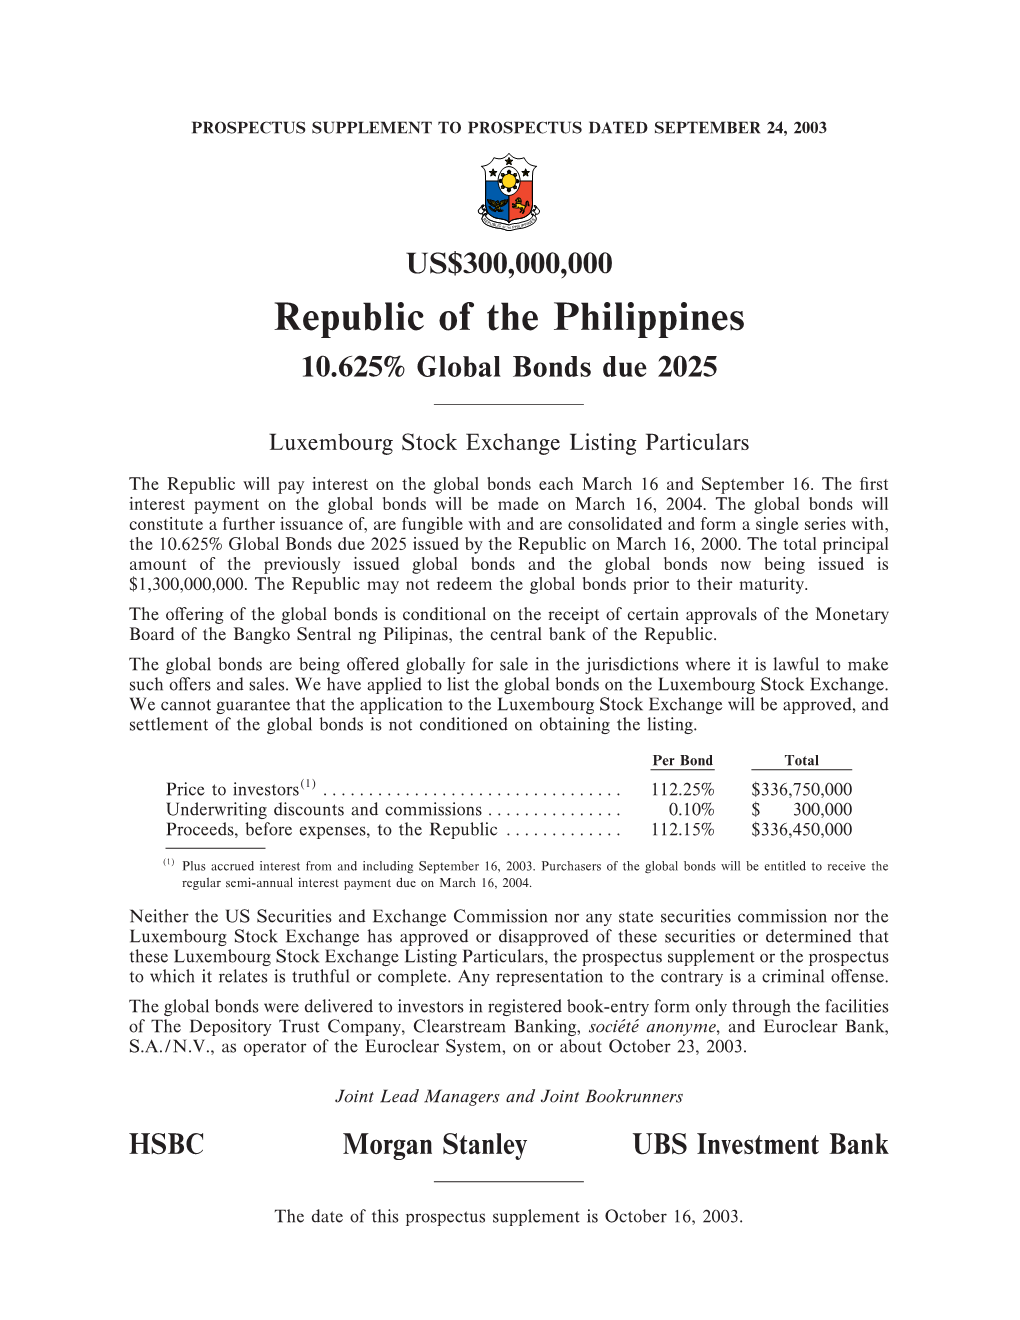 Republic of the Philippines 10.625% Global Bonds Due 2025